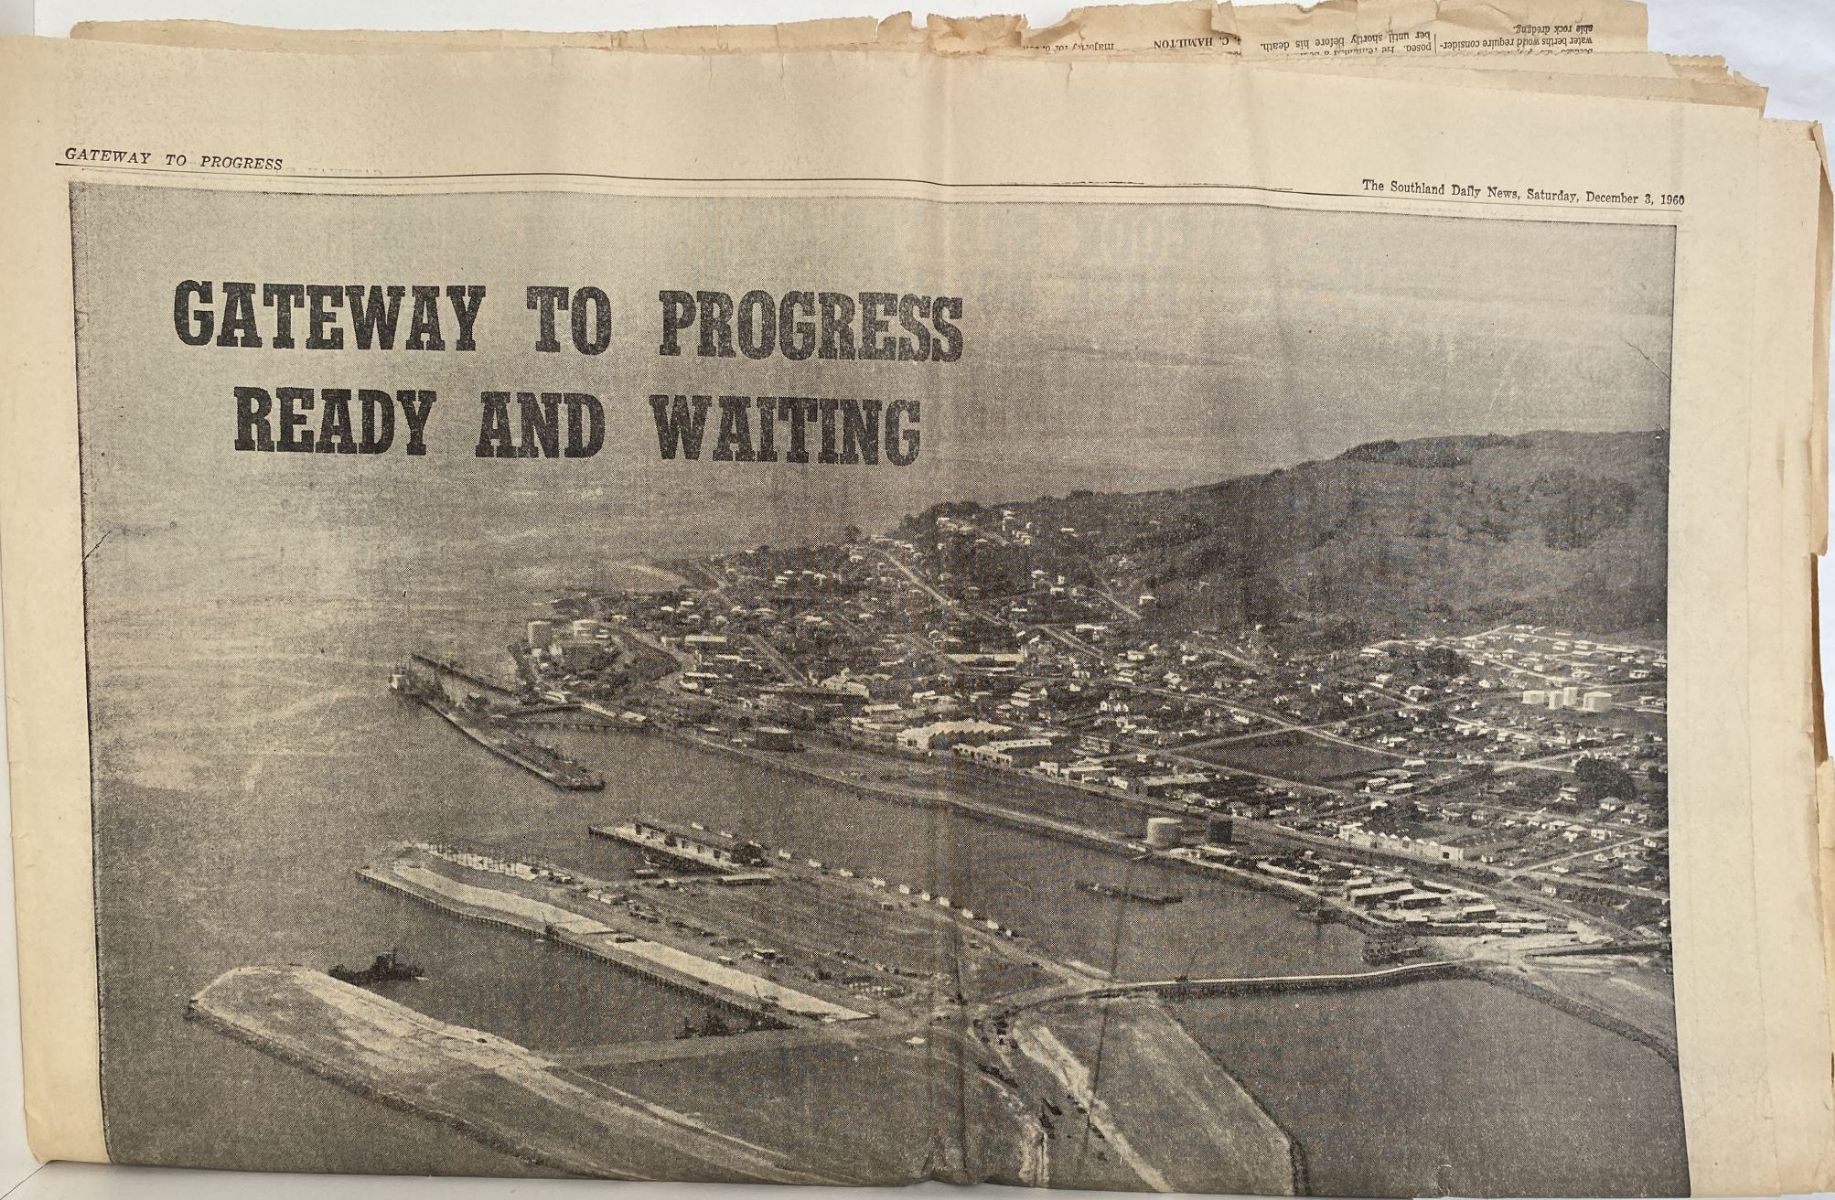 OLD NEWSPAPER: The Southland Daily New 1960 - Bluff Island Harbour opening